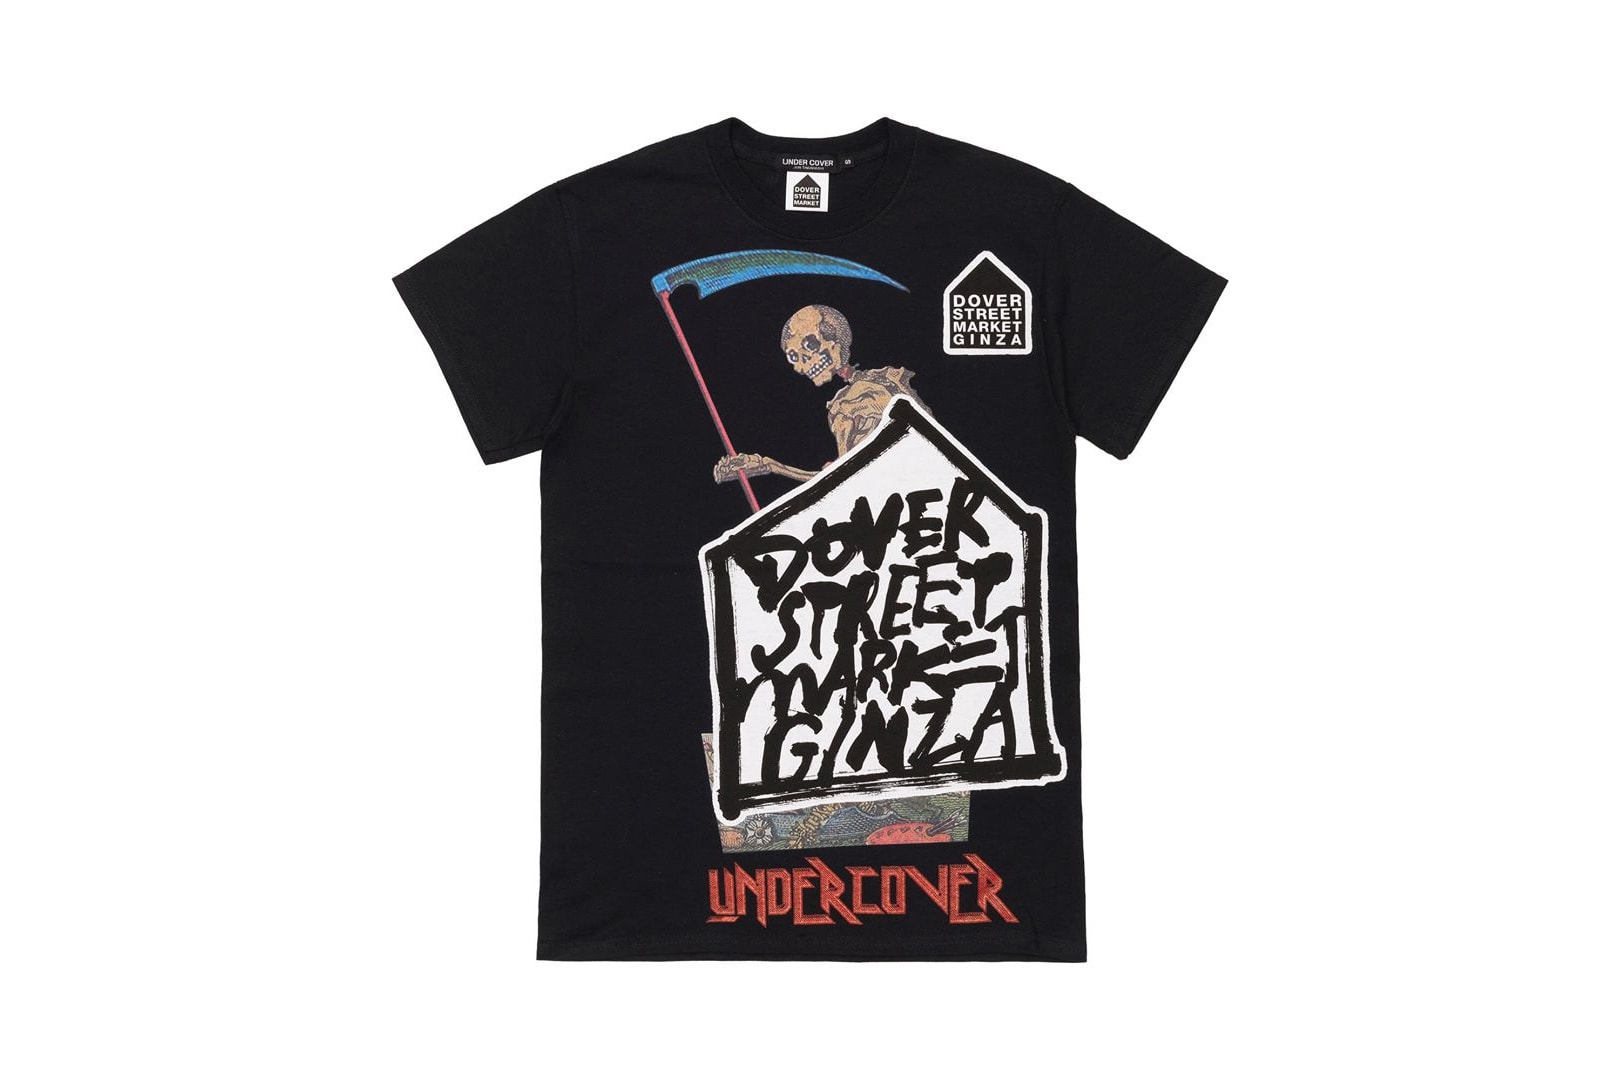 UNDERCOVER Dover Street Market Ginza 5th Anniversary Chaos and Balance Reaper T-Shirt Front